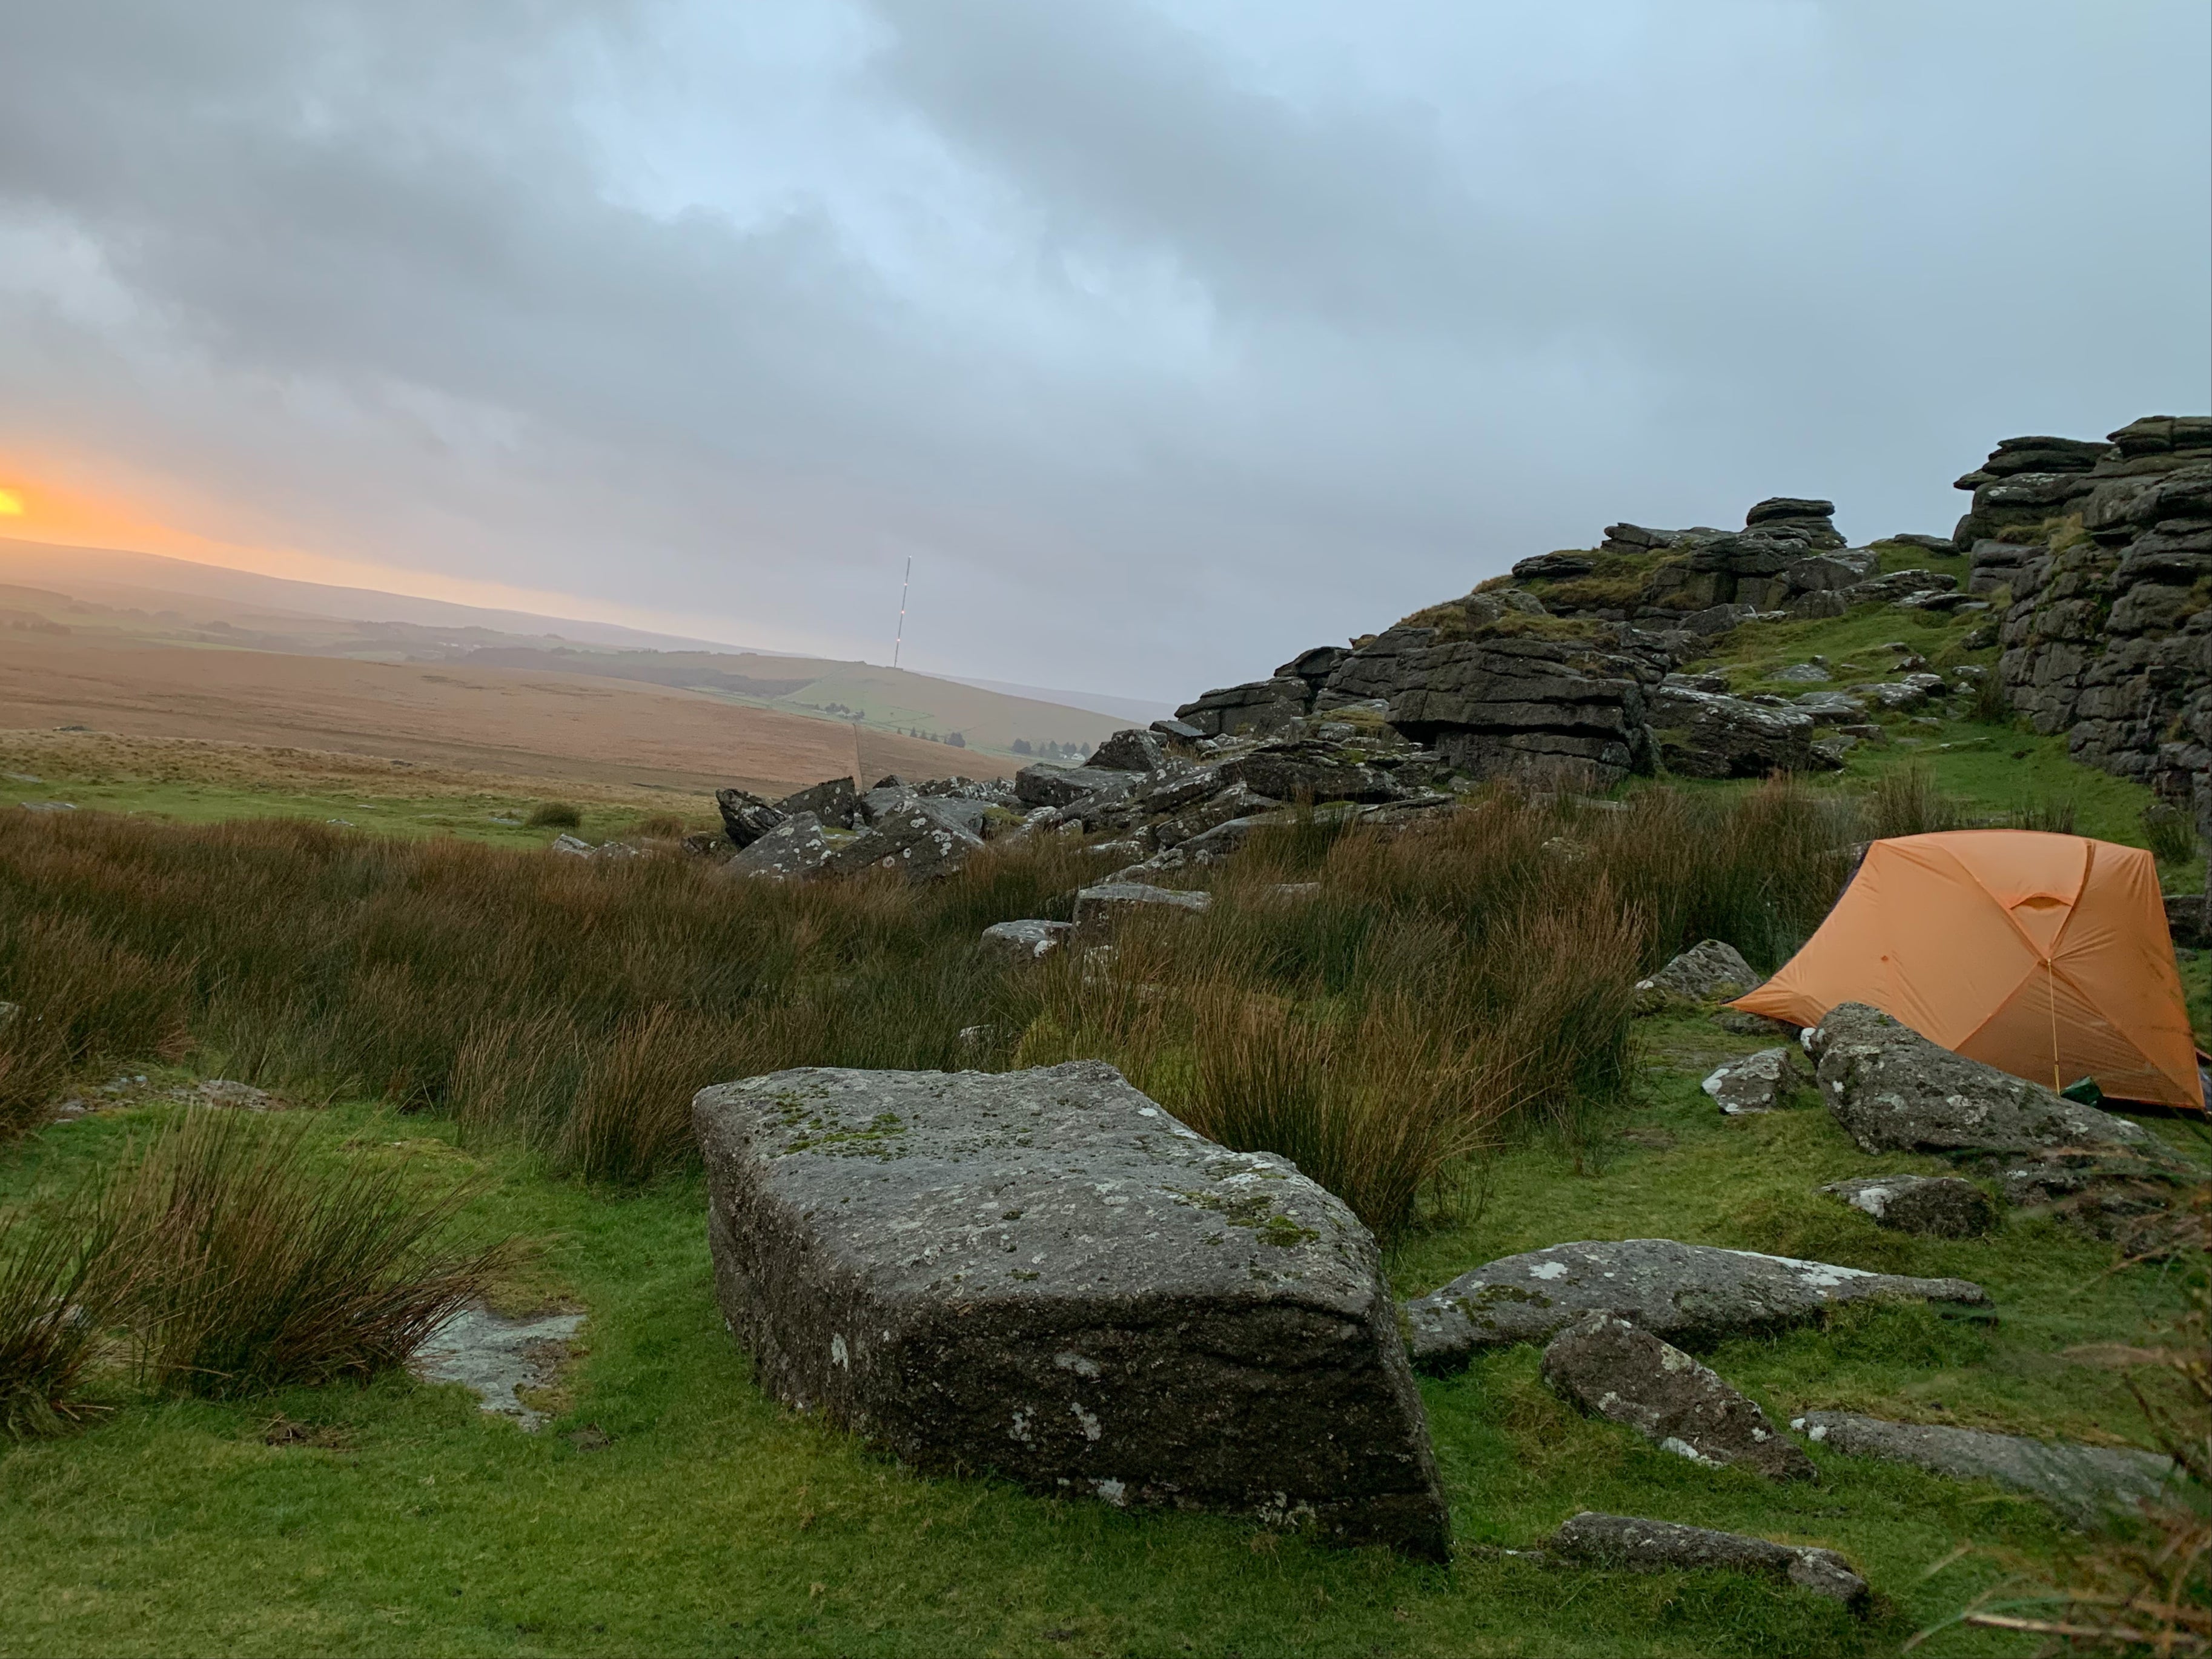 Going off-grid requires planning, survival skills and the right kit